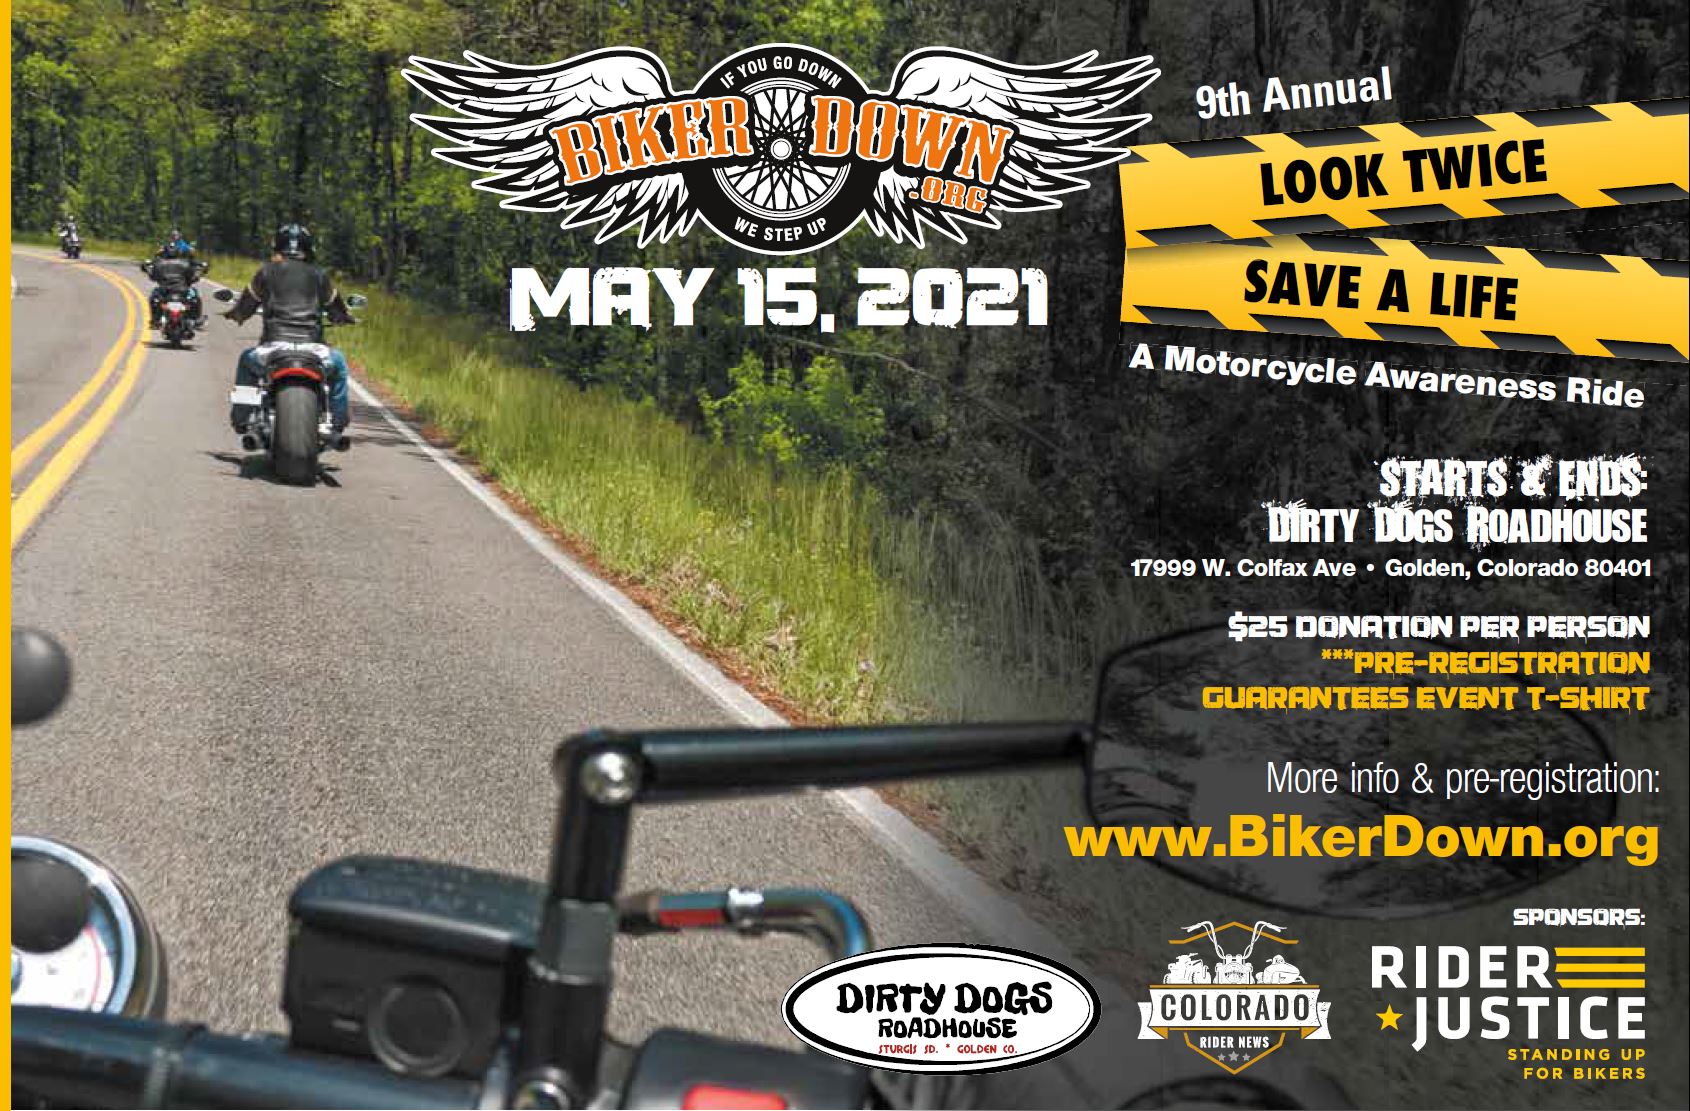 TOMORROW: BikerDown’s Motorcycle Awareness Ride: Can YOU SEE Me NOW starts at Dirty Dogs Roadhouse